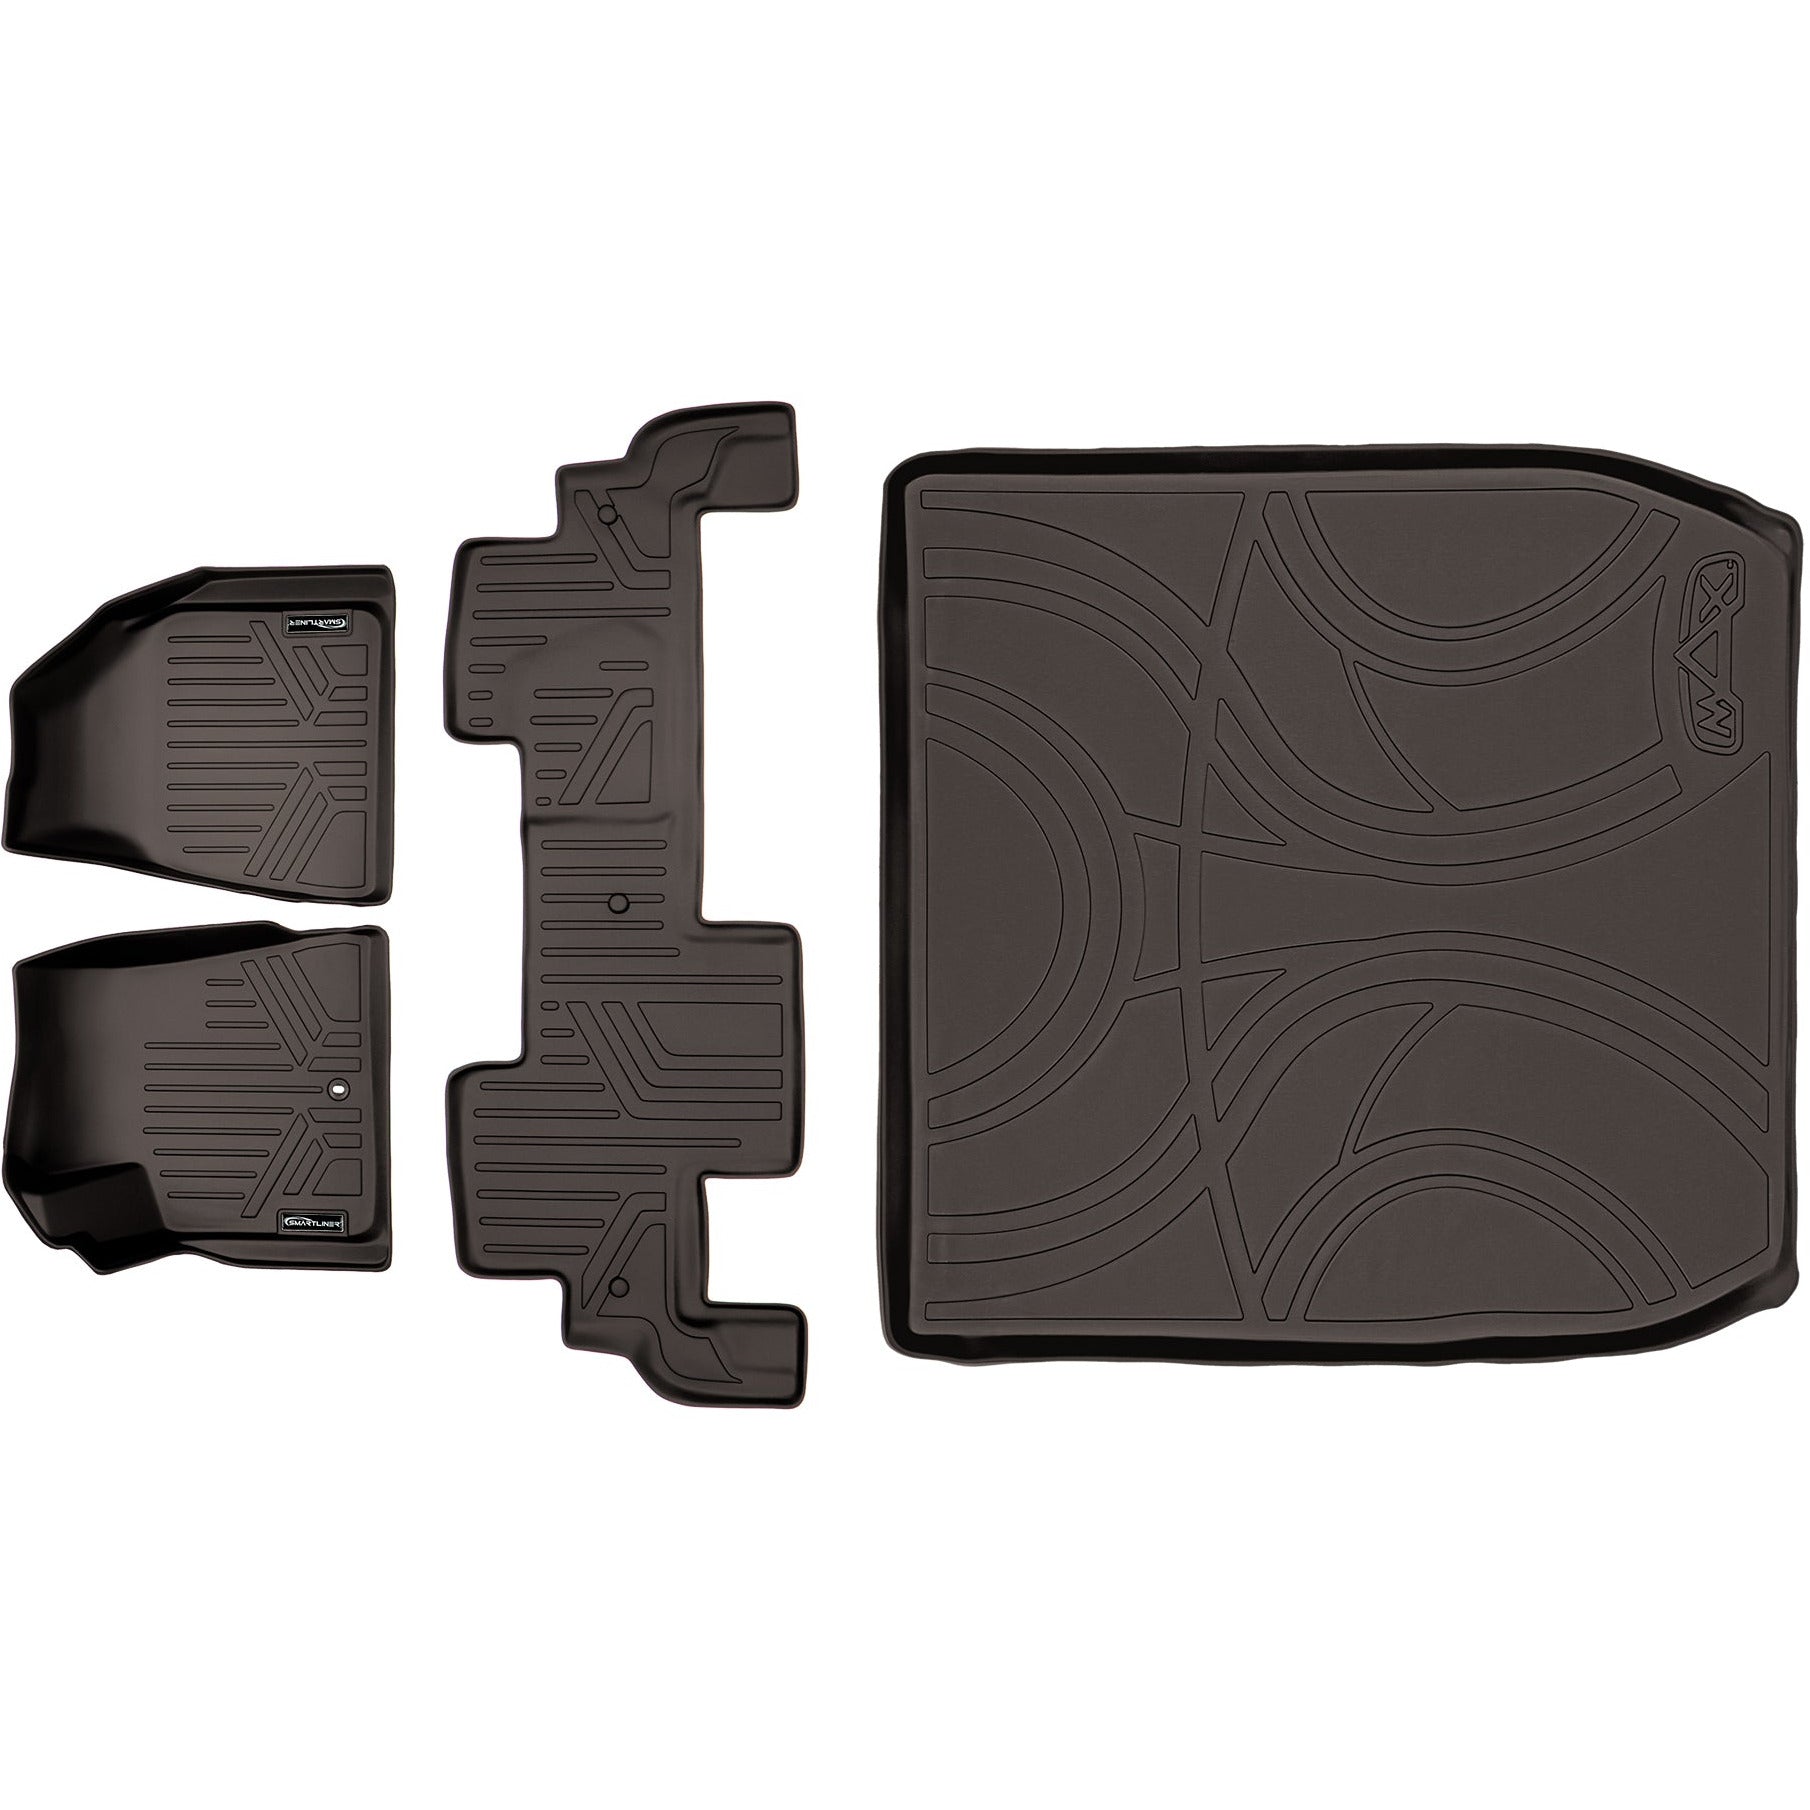 SMARTLINER Custom Fit Floor Liners For Traverse/Enclave/Acadia/Outlook (with 2nd Row Bench Seat)